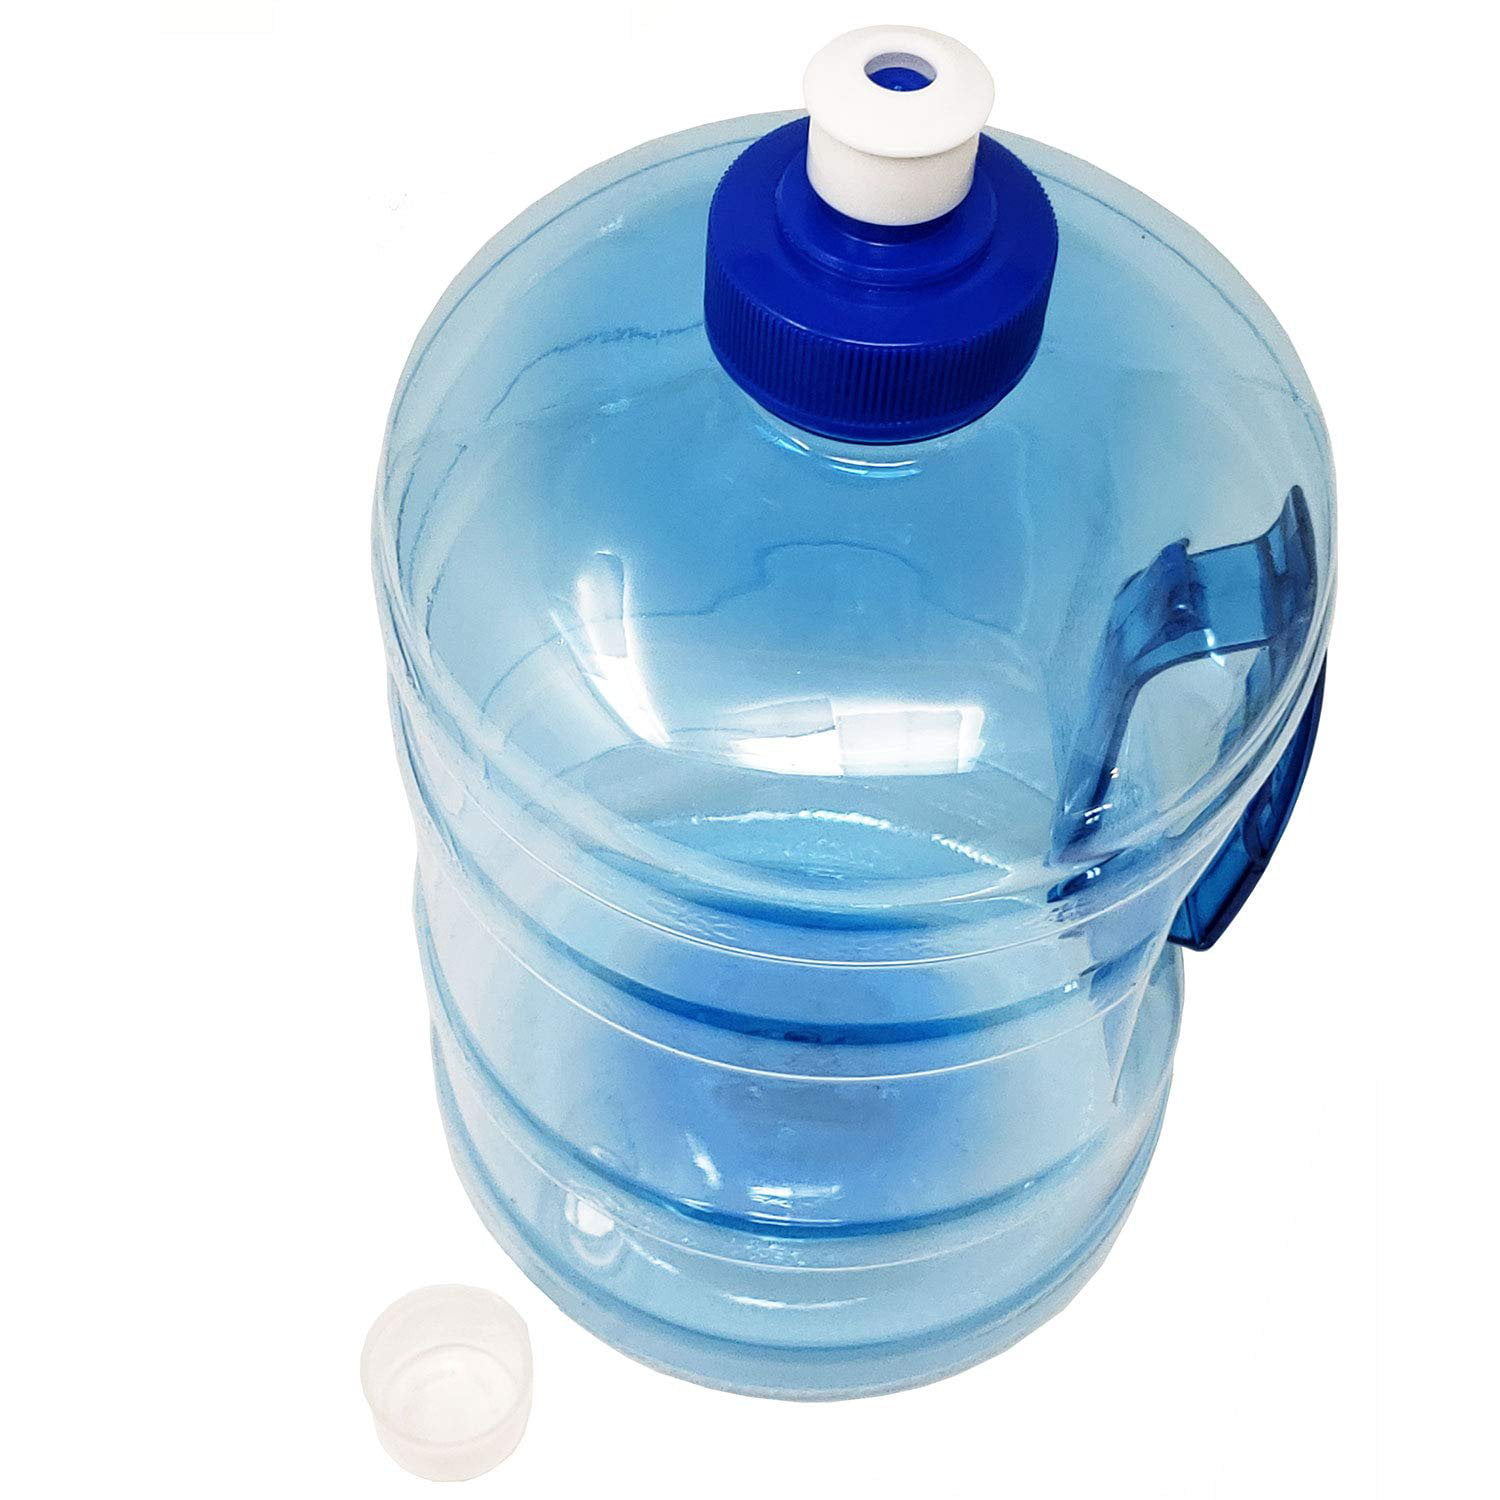 Toddmomy Bucket Fitness Cup Half Gallon Water Bottle Gym Water Jug Exercise  Water Bottle Motivationa…See more Toddmomy Bucket Fitness Cup Half Gallon